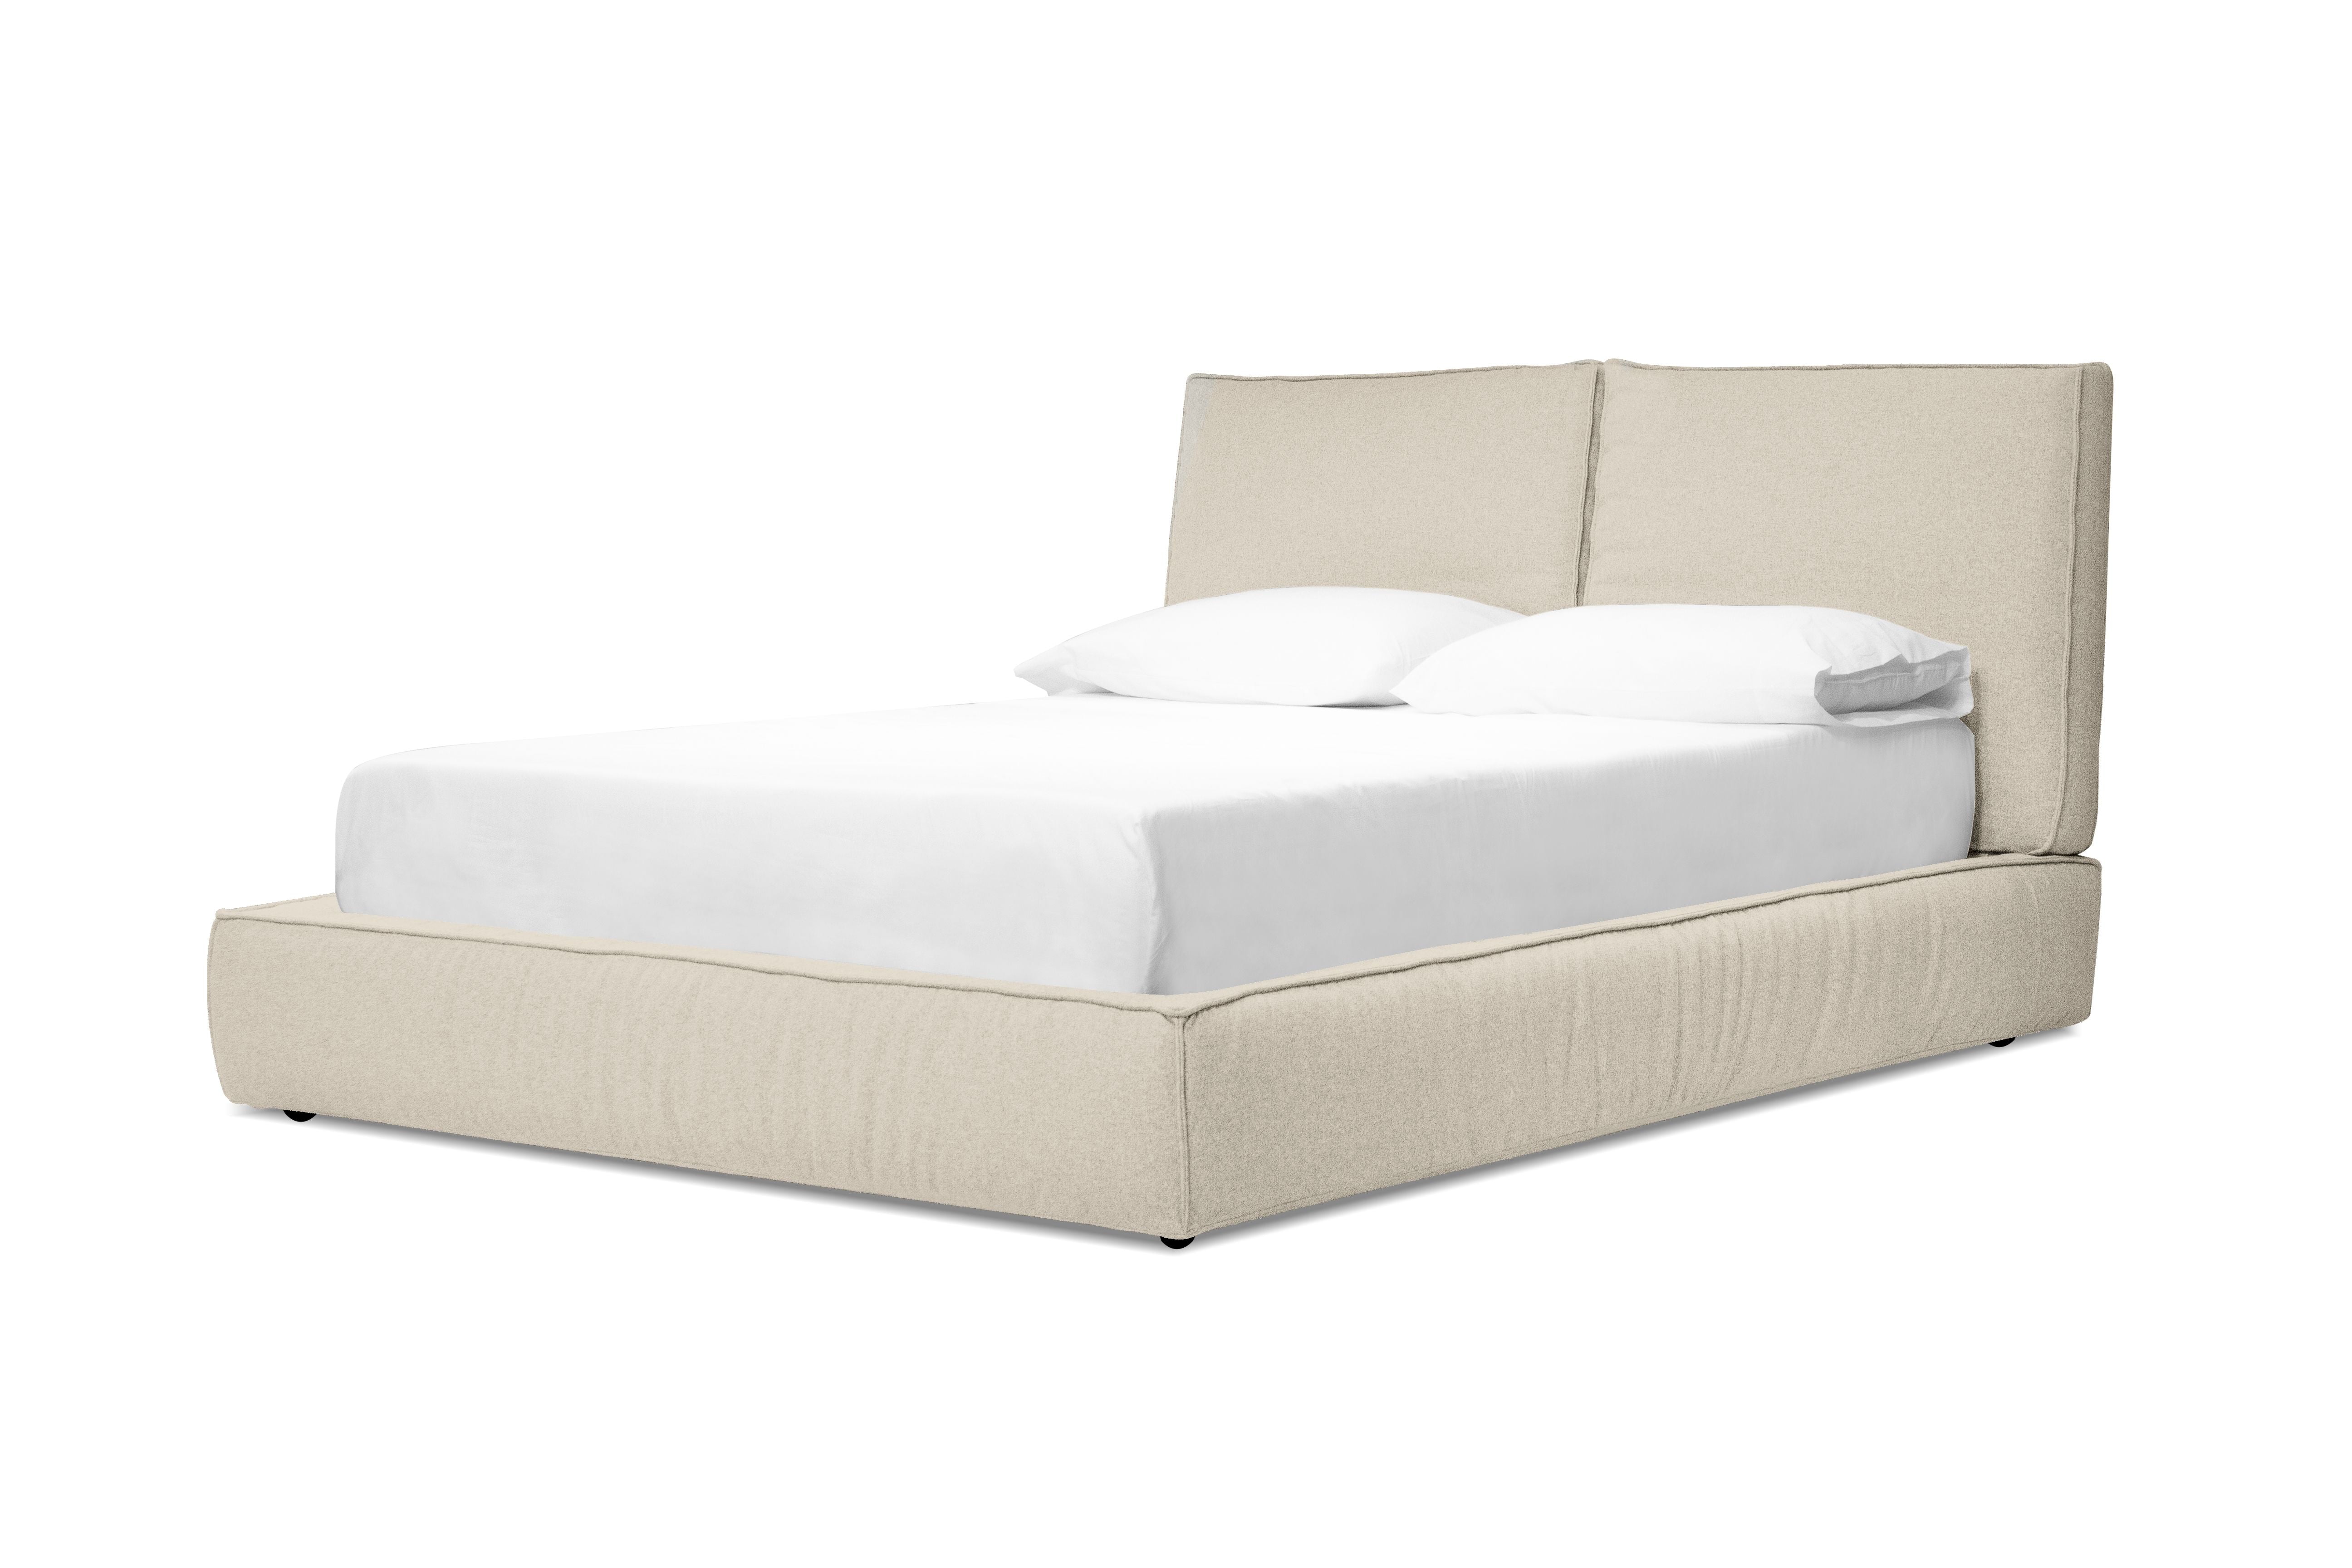 //mobital.com/cdn/shop/products/BED-BEND-ALMO-QUEEN.png?v=1712260811&width=360 360w,//mobital.com/cdn/shop/products/BED-BEND-ALMO-QUEEN.png?v=1712260811&width=375 375w,//mobital.com/cdn/shop/products/BED-BEND-ALMO-QUEEN.png?v=1712260811&width=535 535w,//mobital.com/cdn/shop/products/BED-BEND-ALMO-QUEEN.png?v=1712260811&width=750 750w,//mobital.com/cdn/shop/products/BED-BEND-ALMO-QUEEN.png?v=1712260811&width=1024 1024w,//mobital.com/cdn/shop/products/BED-BEND-ALMO-QUEEN.png?v=1712260811&width=1280 1280w,//mobital.com/cdn/shop/products/BED-BEND-ALMO-QUEEN.png?v=1712260811&width=1366 1366w,//mobital.com/cdn/shop/products/BED-BEND-ALMO-QUEEN.png?v=1712260811&width=1440 1440w,//mobital.com/cdn/shop/products/BED-BEND-ALMO-QUEEN.png?v=1712260811&width=1920 1920w,//mobital.com/cdn/shop/products/BED-BEND-ALMO-QUEEN.png?v=1712260811&width=2880 2880w